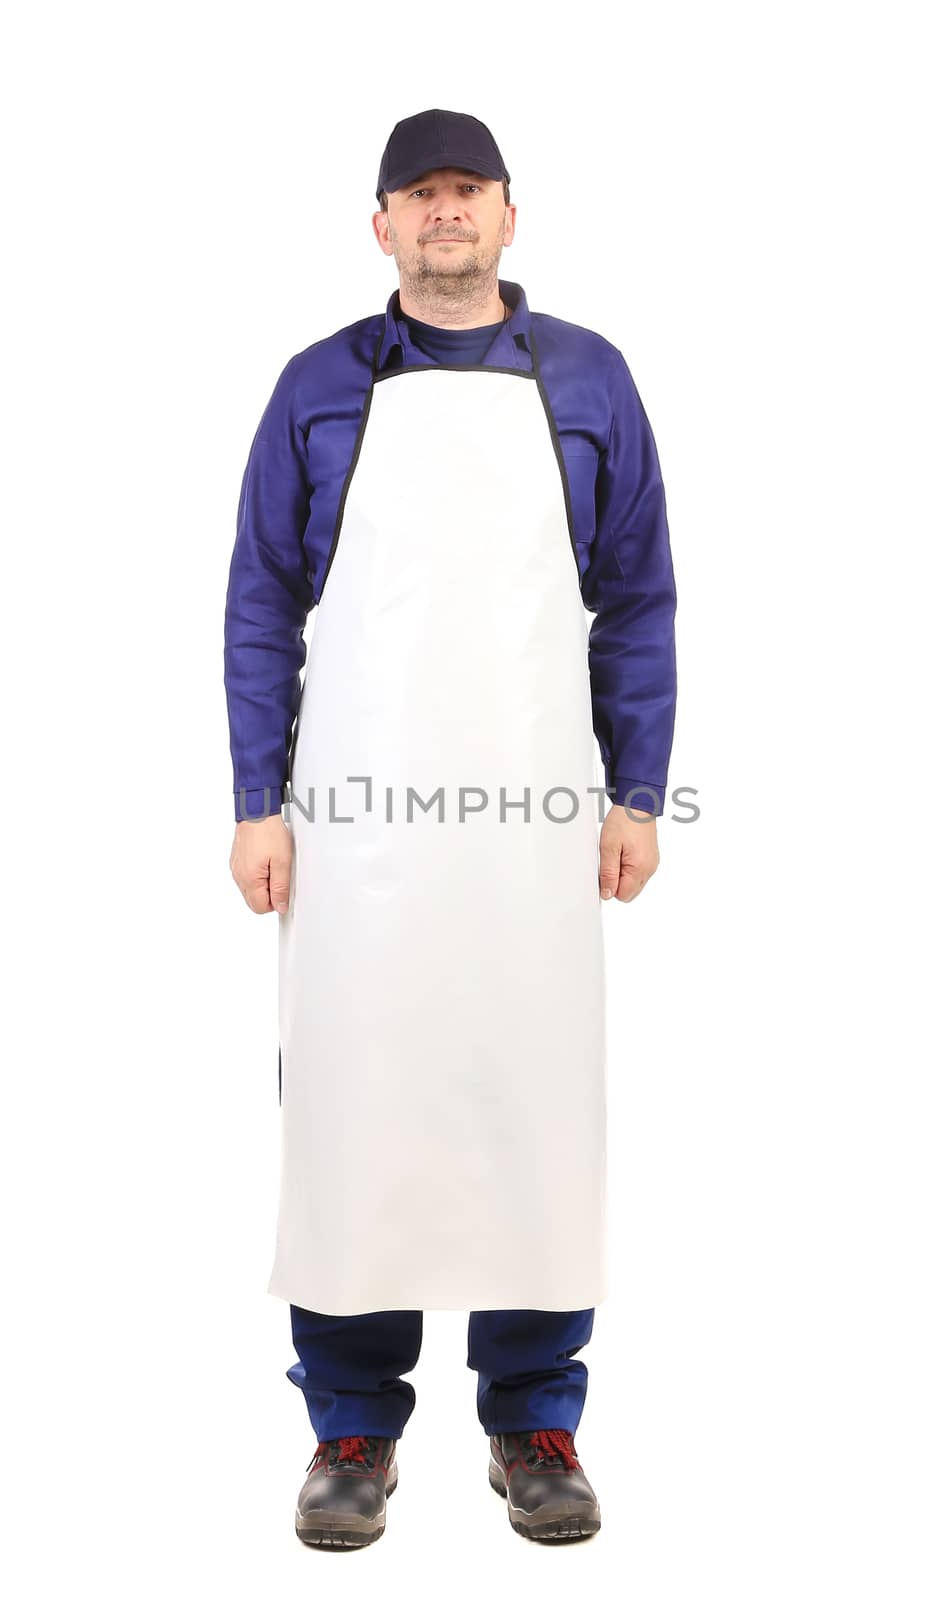 Worker wearing blue apron. Isolated on a white background.